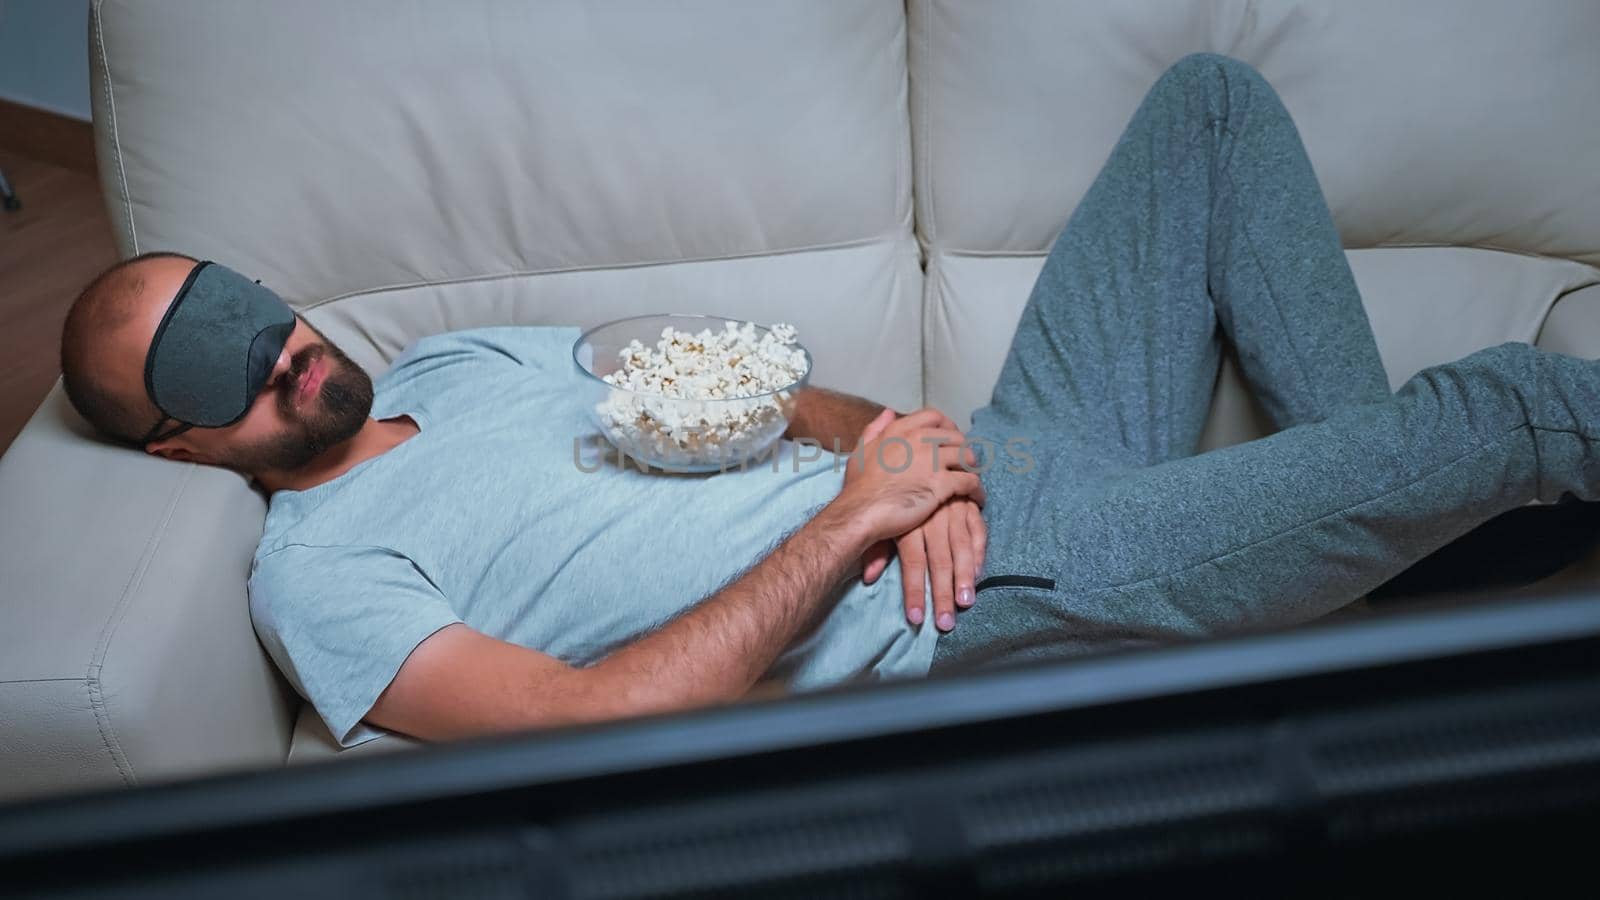 Caucasian male falling asleep while watching movie show sitting on couch late at night in kitchen. Tired man wearing eye sleep mask while the tv is on